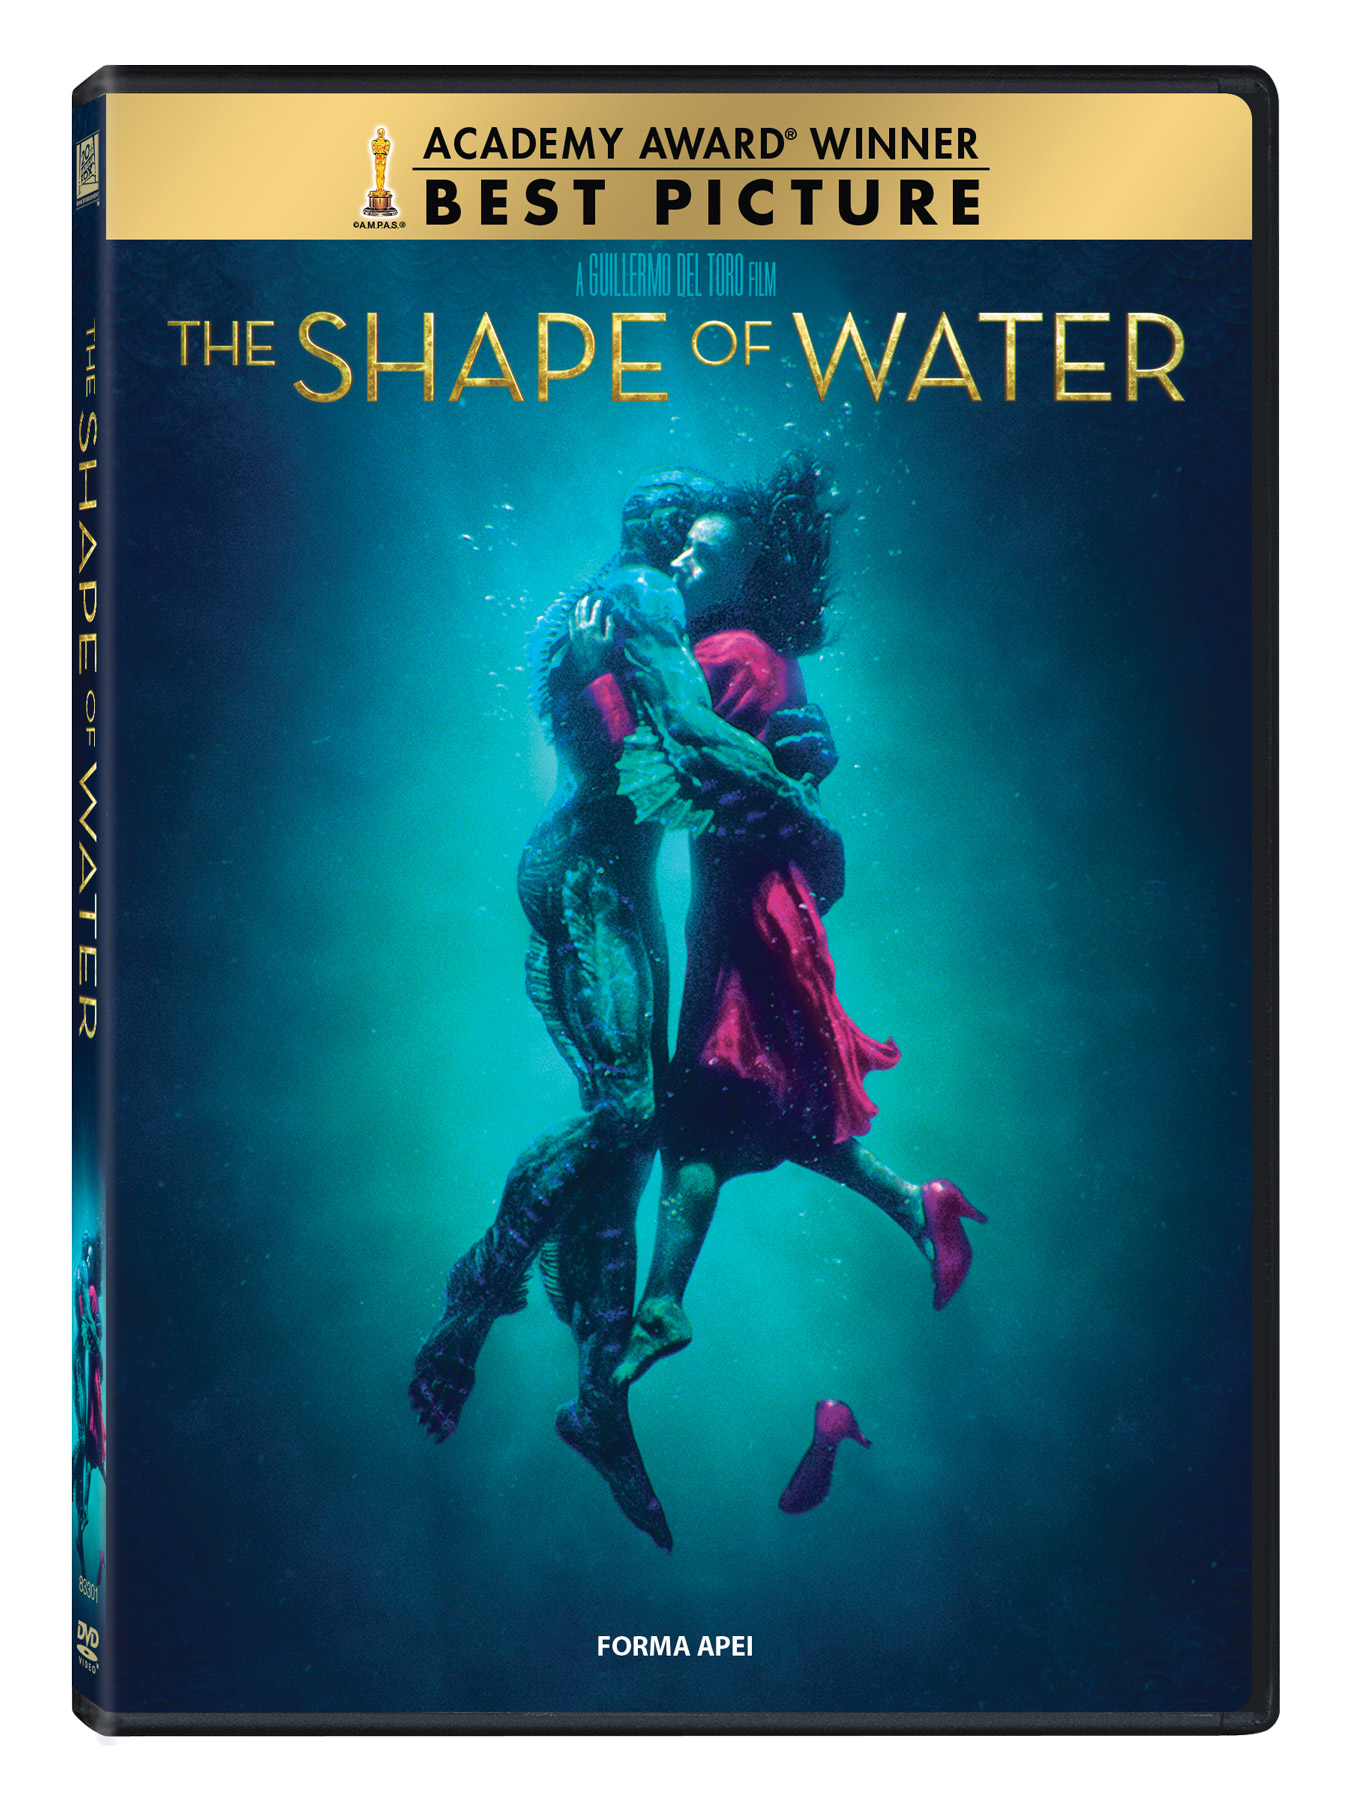 Forma apei / The Shape of Water 